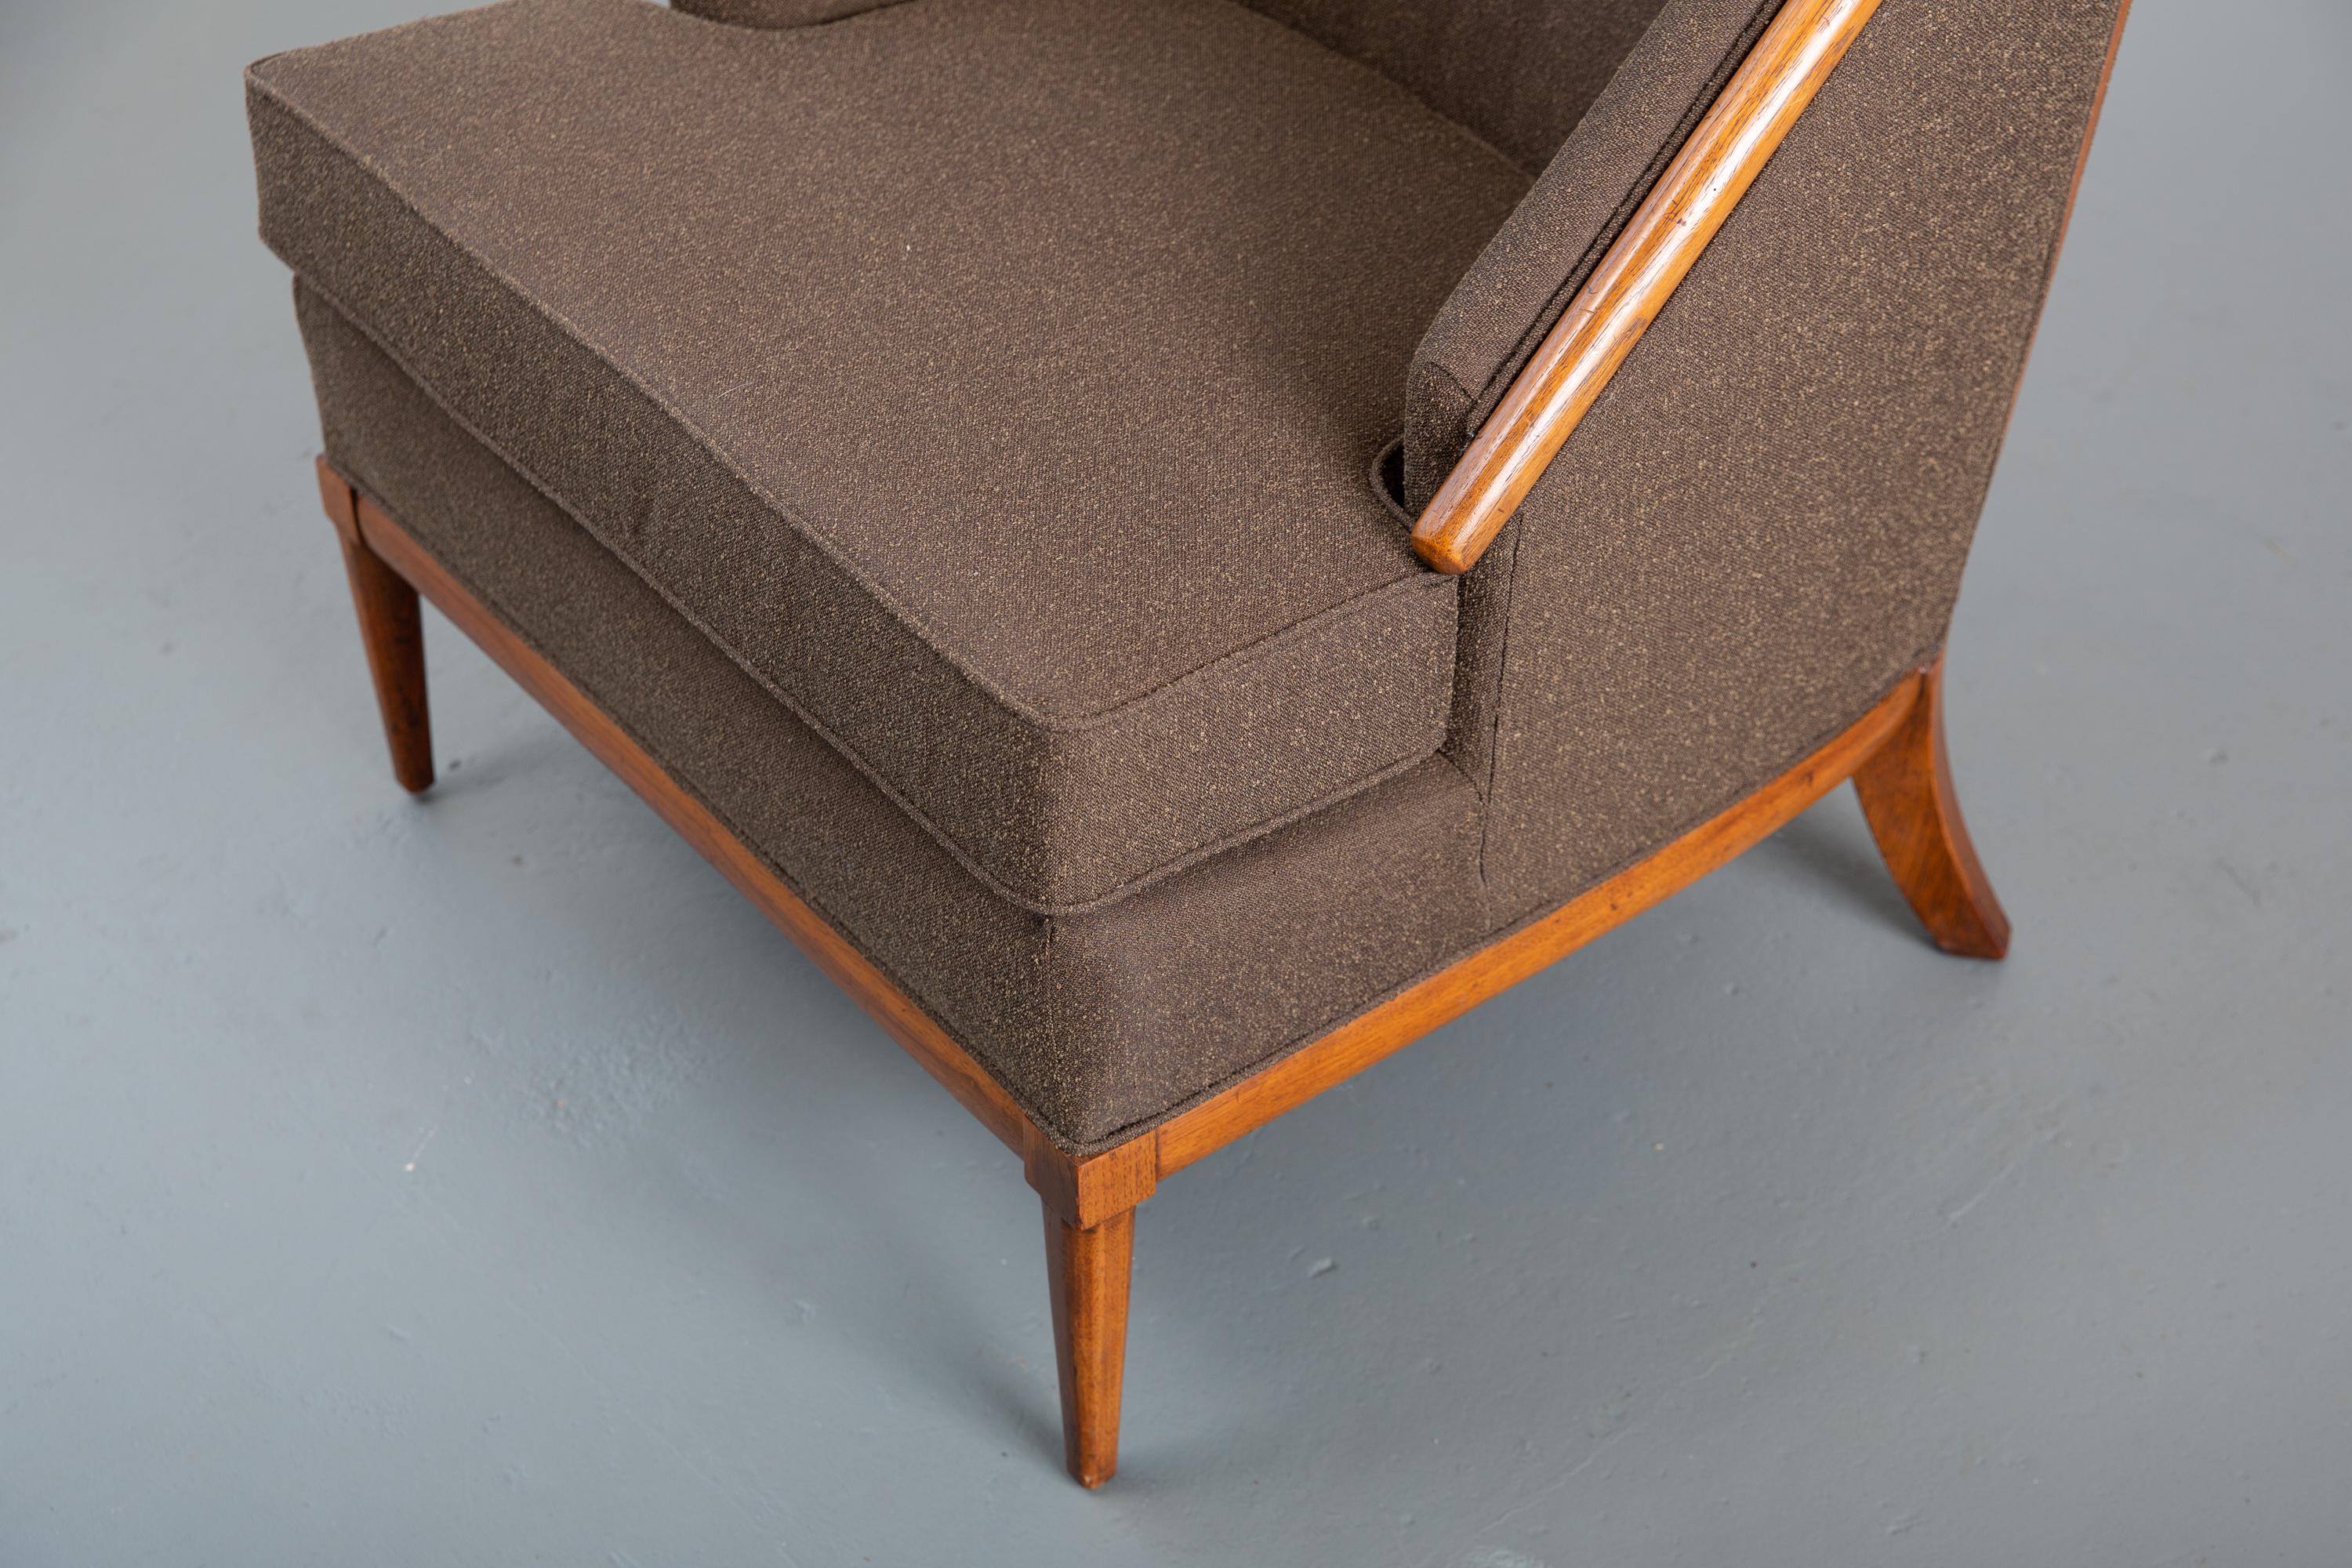 Wood Newly Upholstered Mid-Century Modern Lounge Chair Attributed to Widdicomb